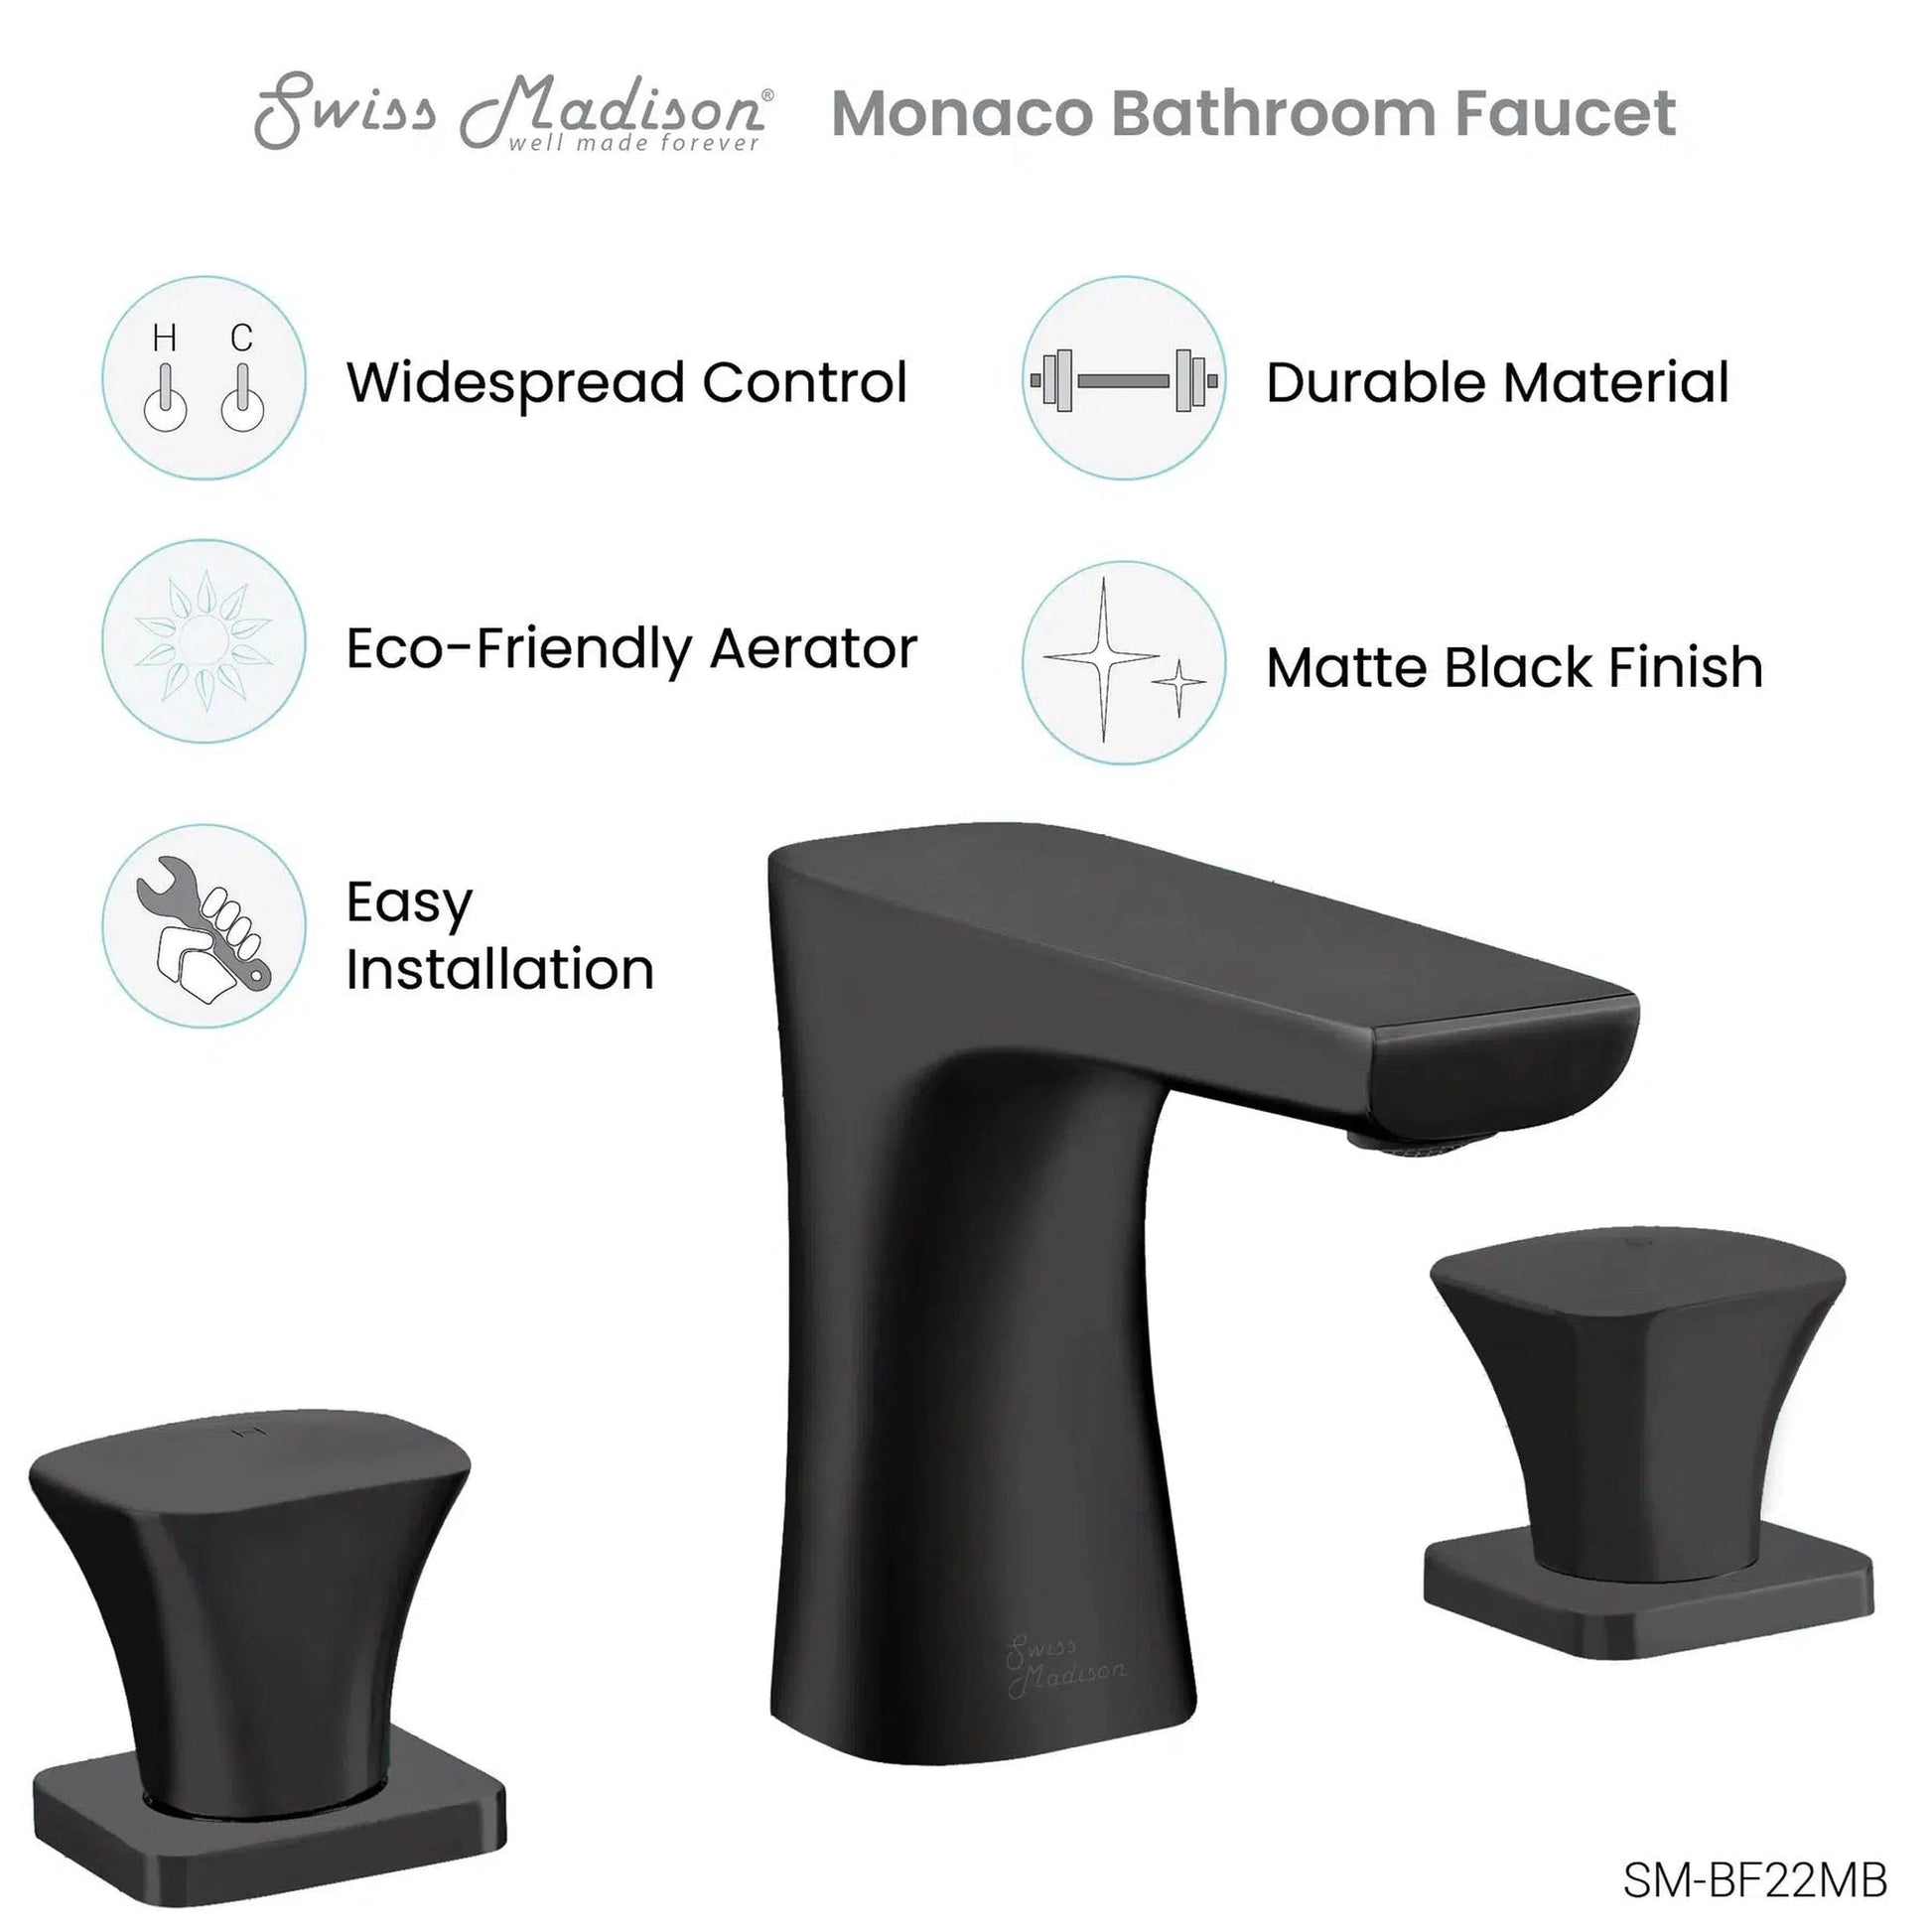 Swiss Madison Monaco 8" Matte Black Widespread Bathroom Faucet With Knob Handles and 1.2 GPM Flow Rate